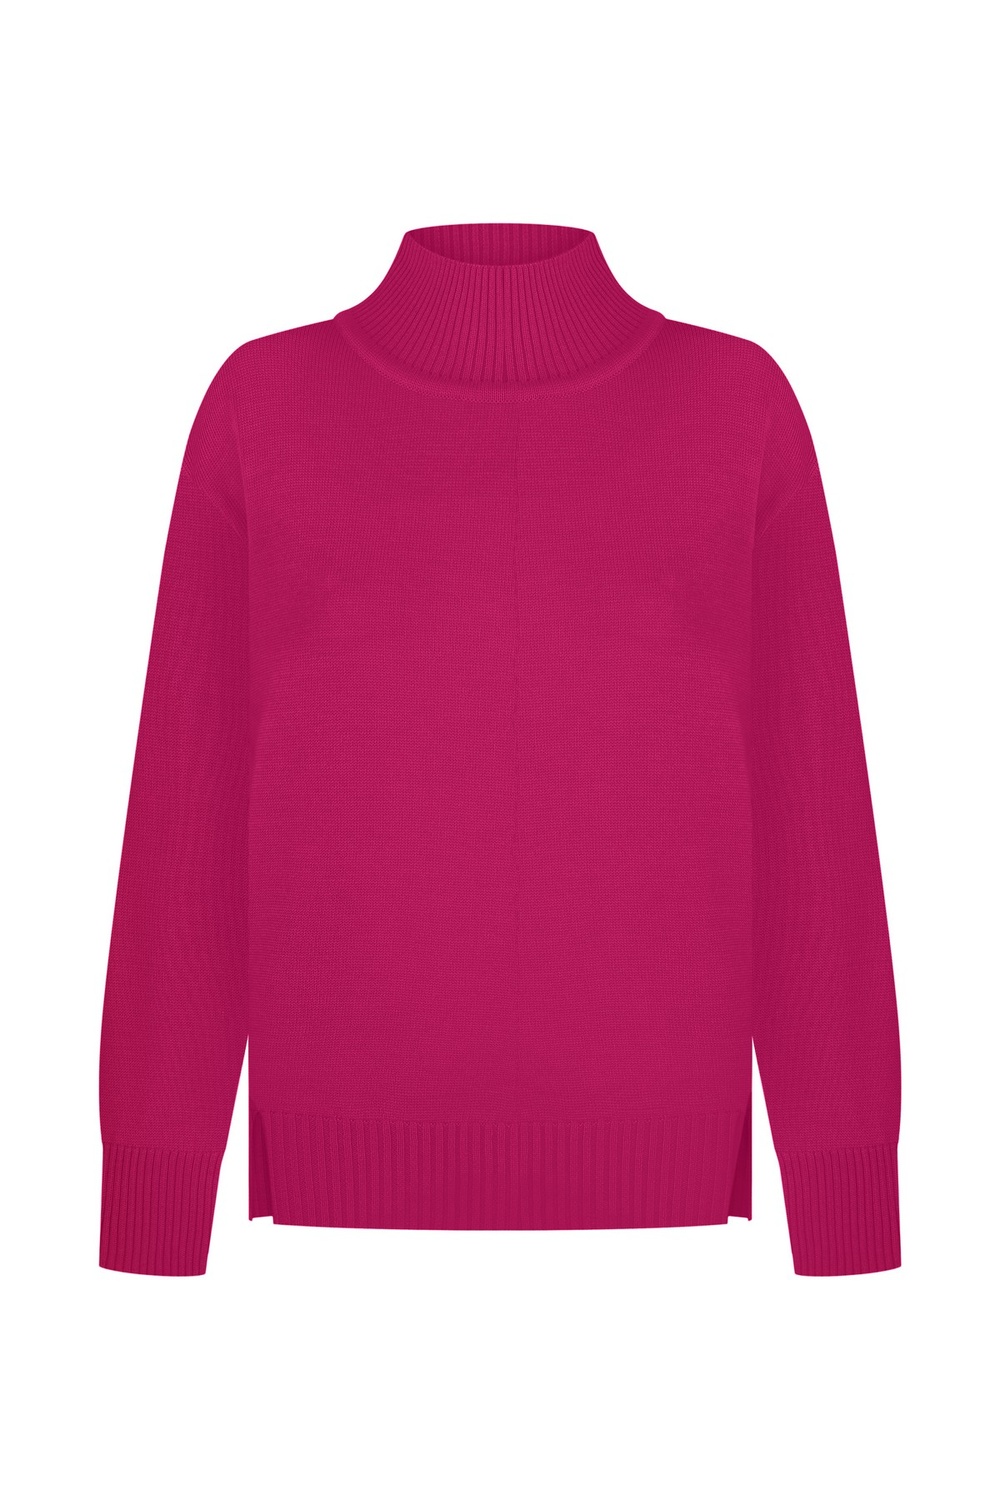 Merino knitted sweater 17 colors